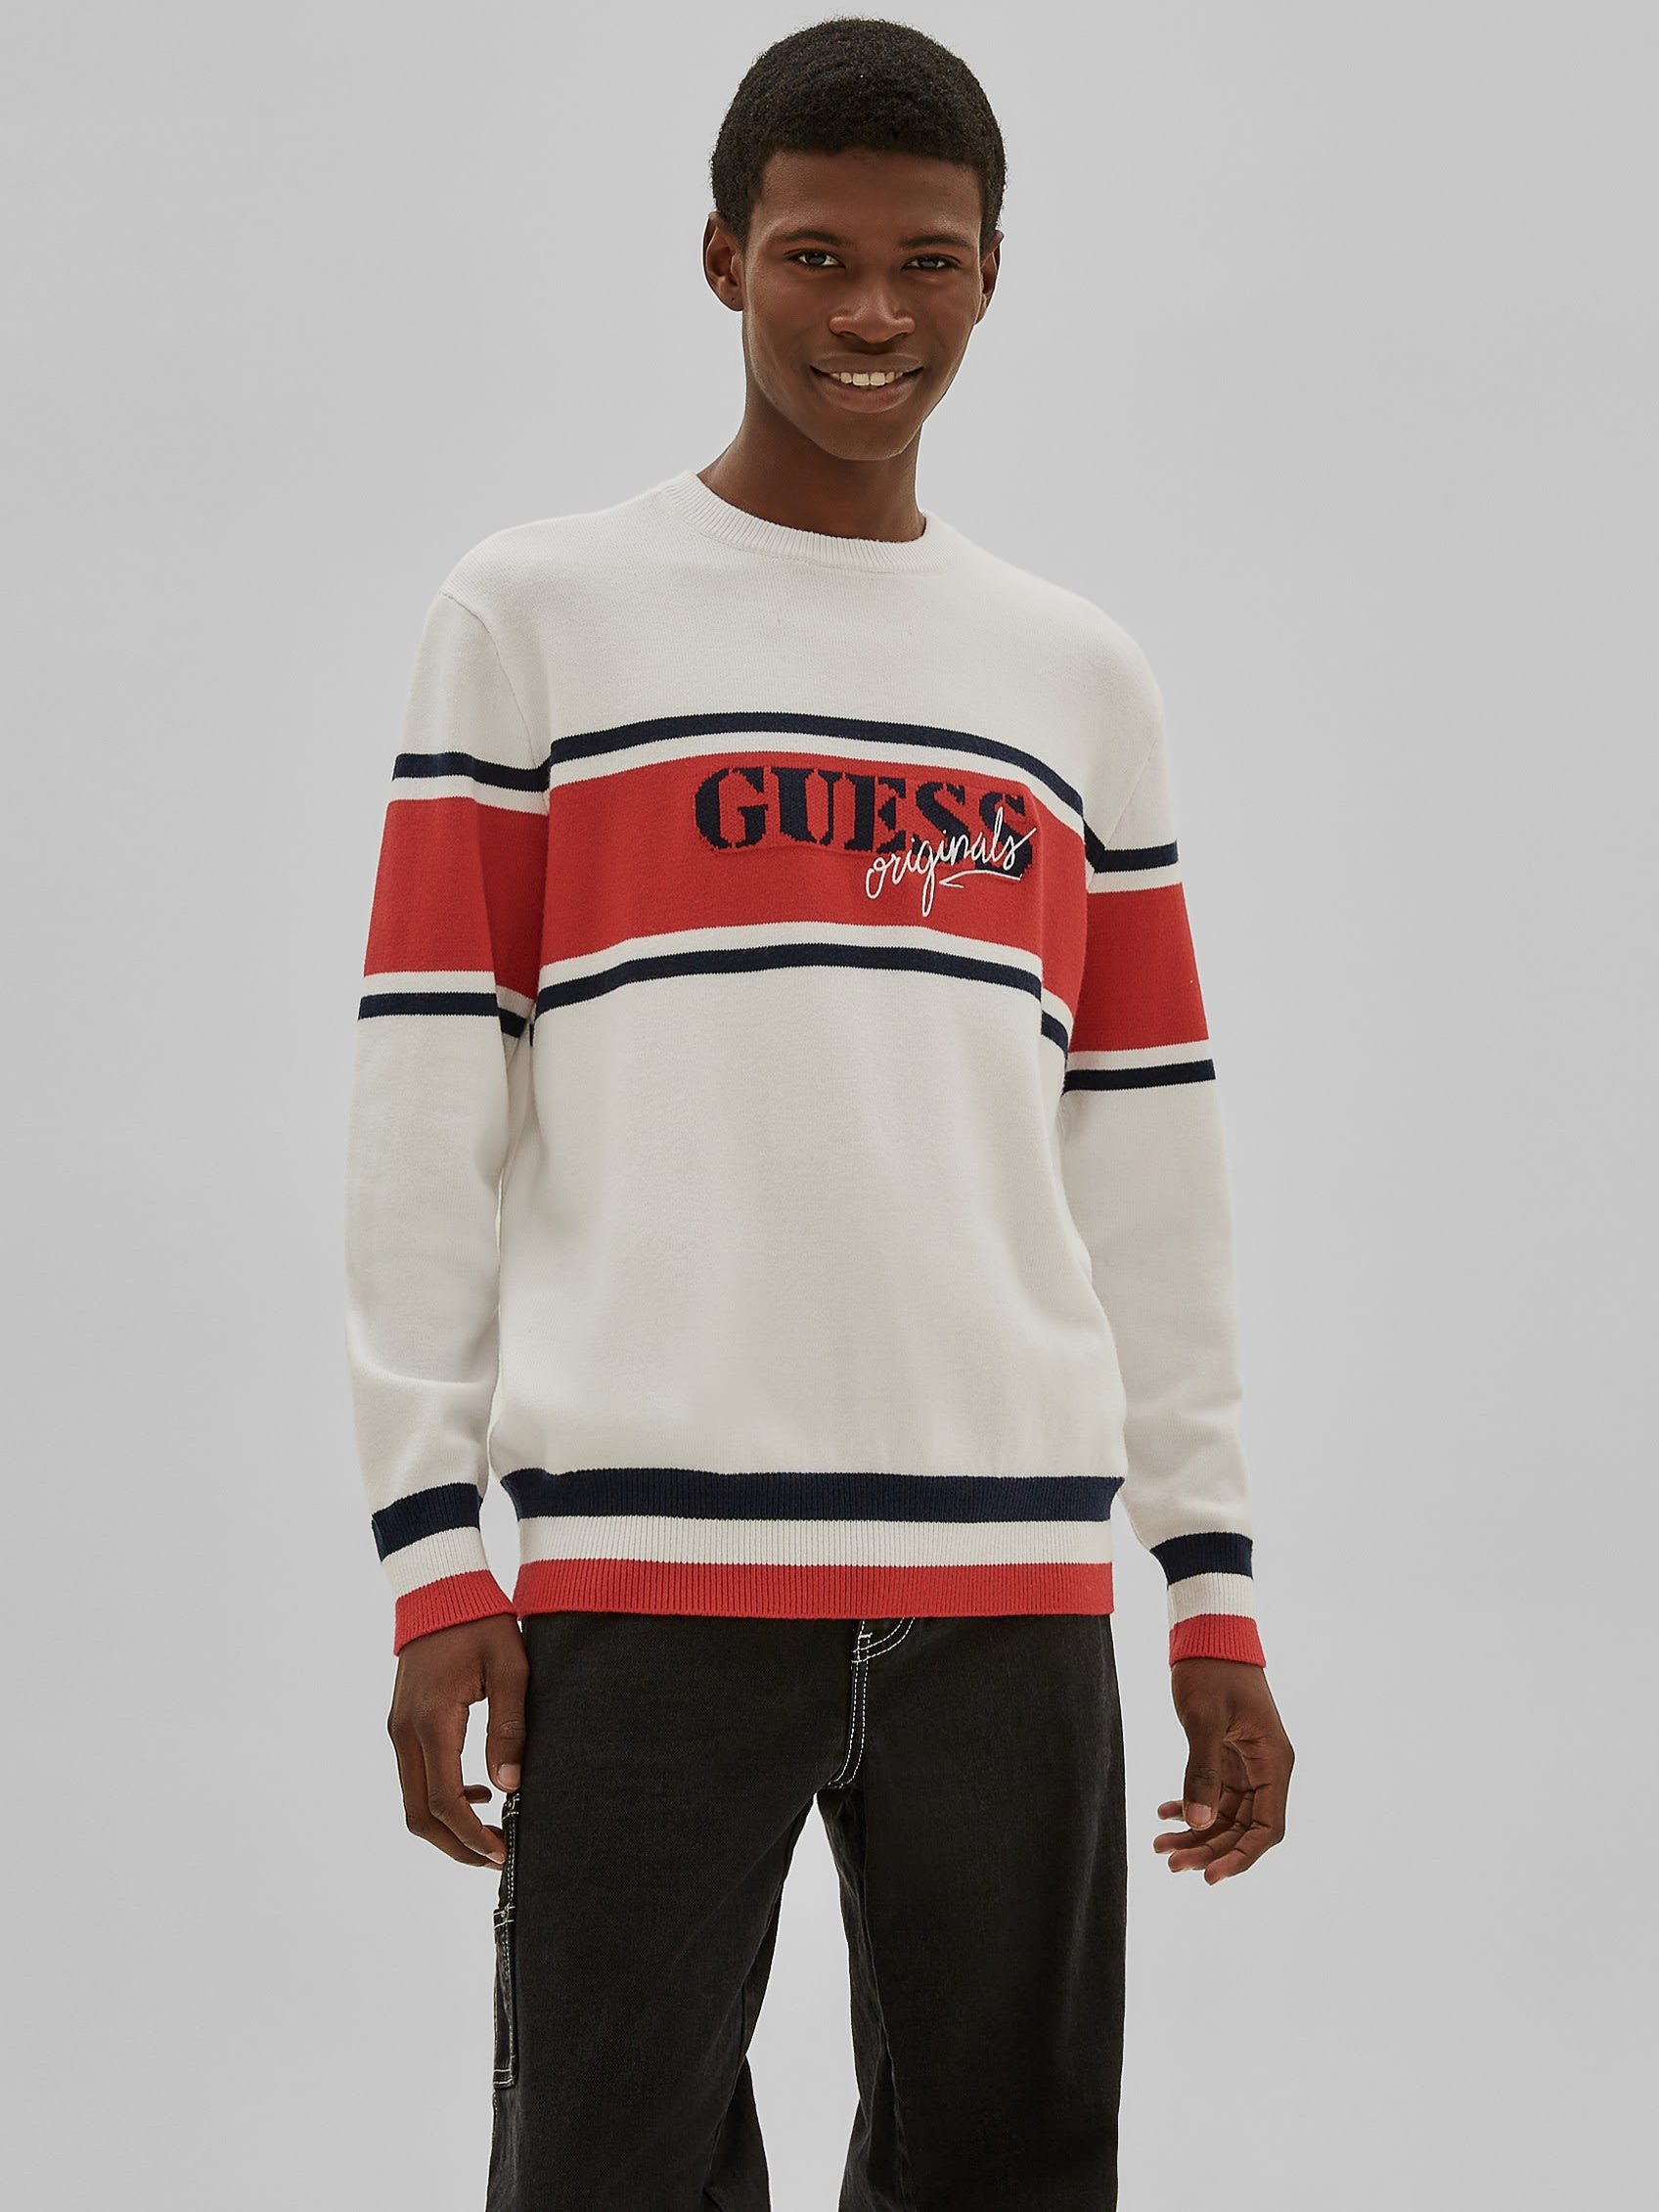 GUESS Originals ACE LOGO SWEATER | Guess Philippines